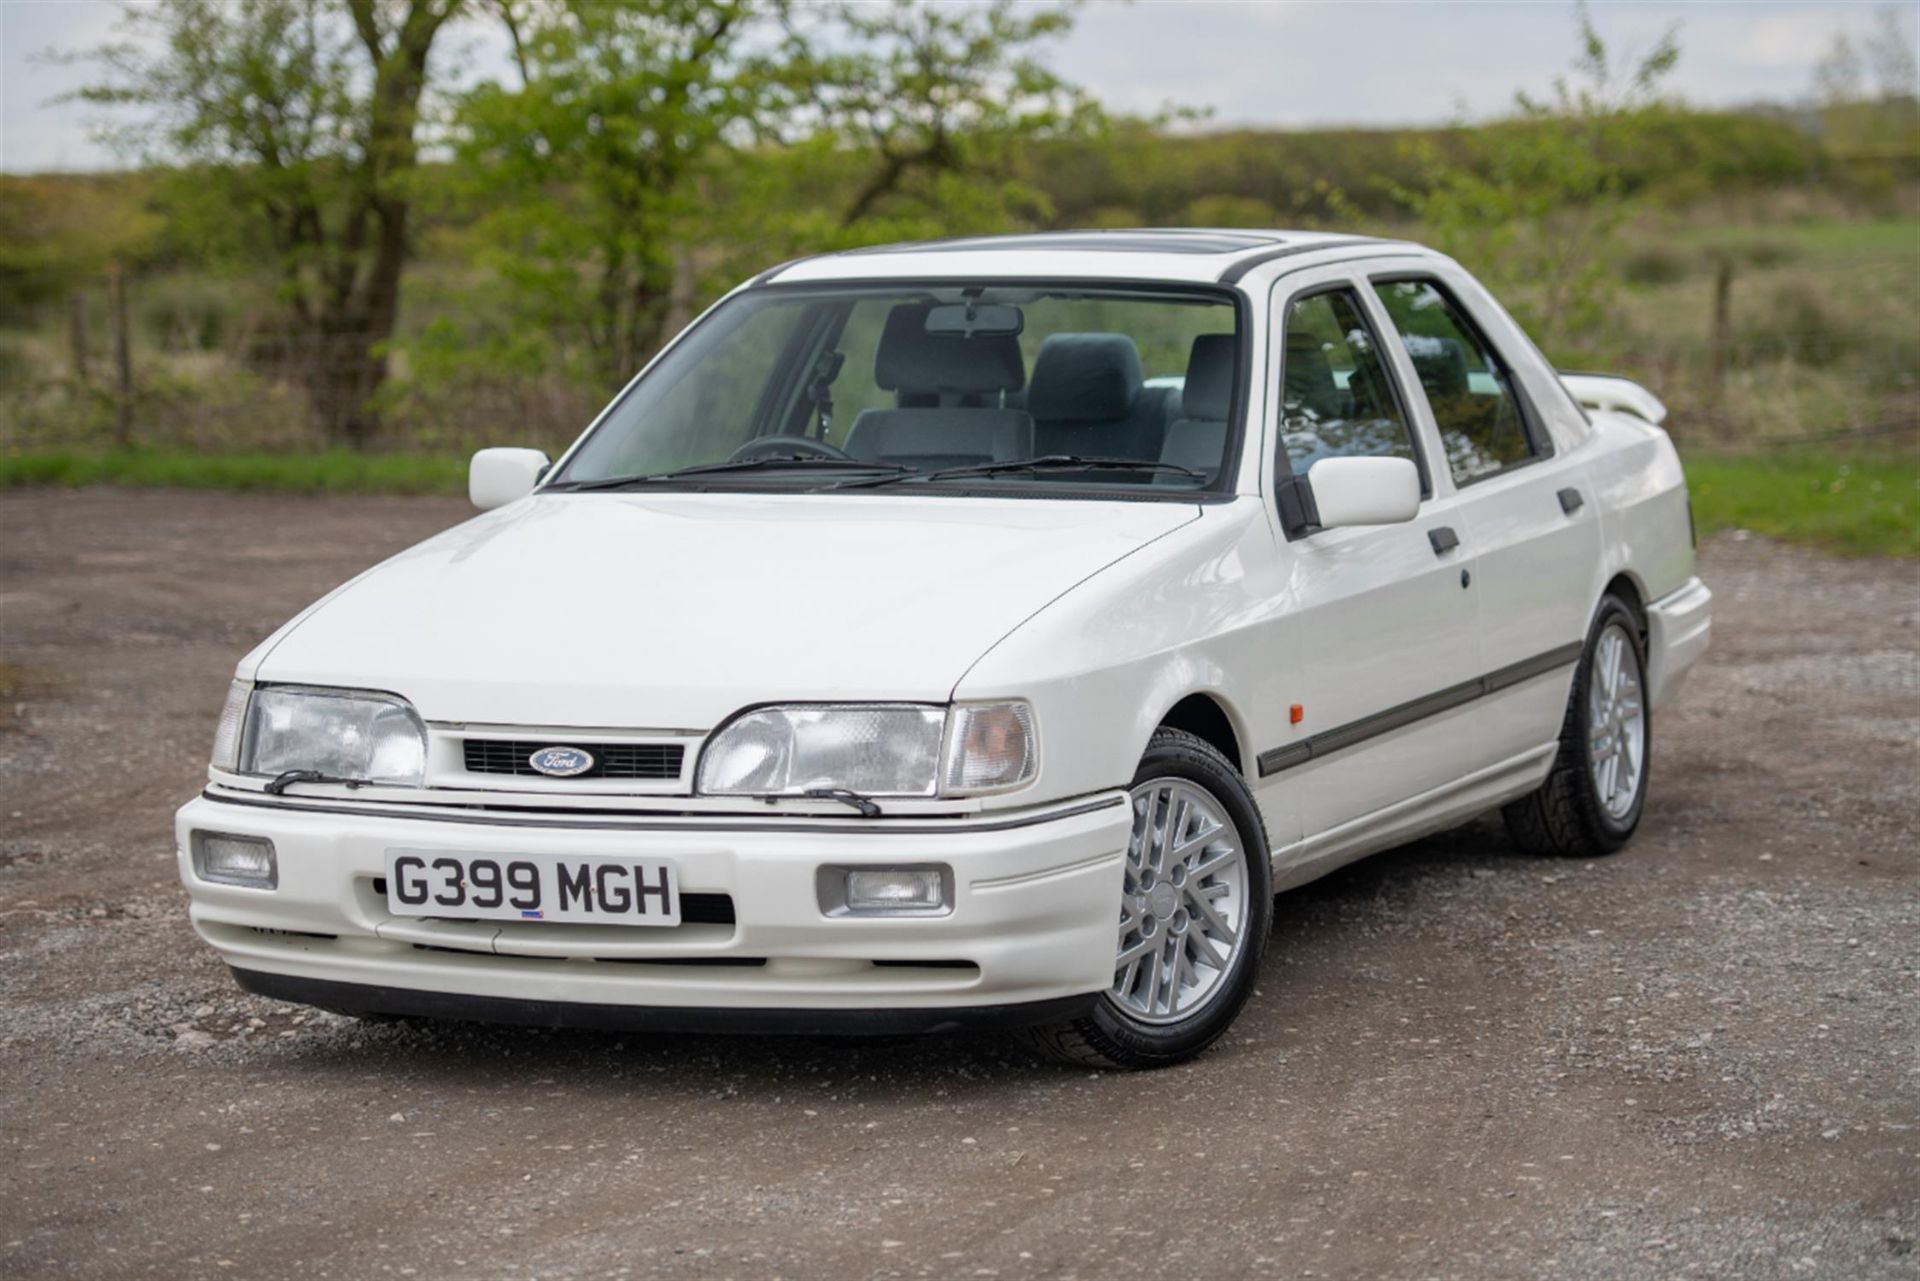 1989 Ford Sierra Sapphire RS Cosworth (2WD) - Image 8 of 10